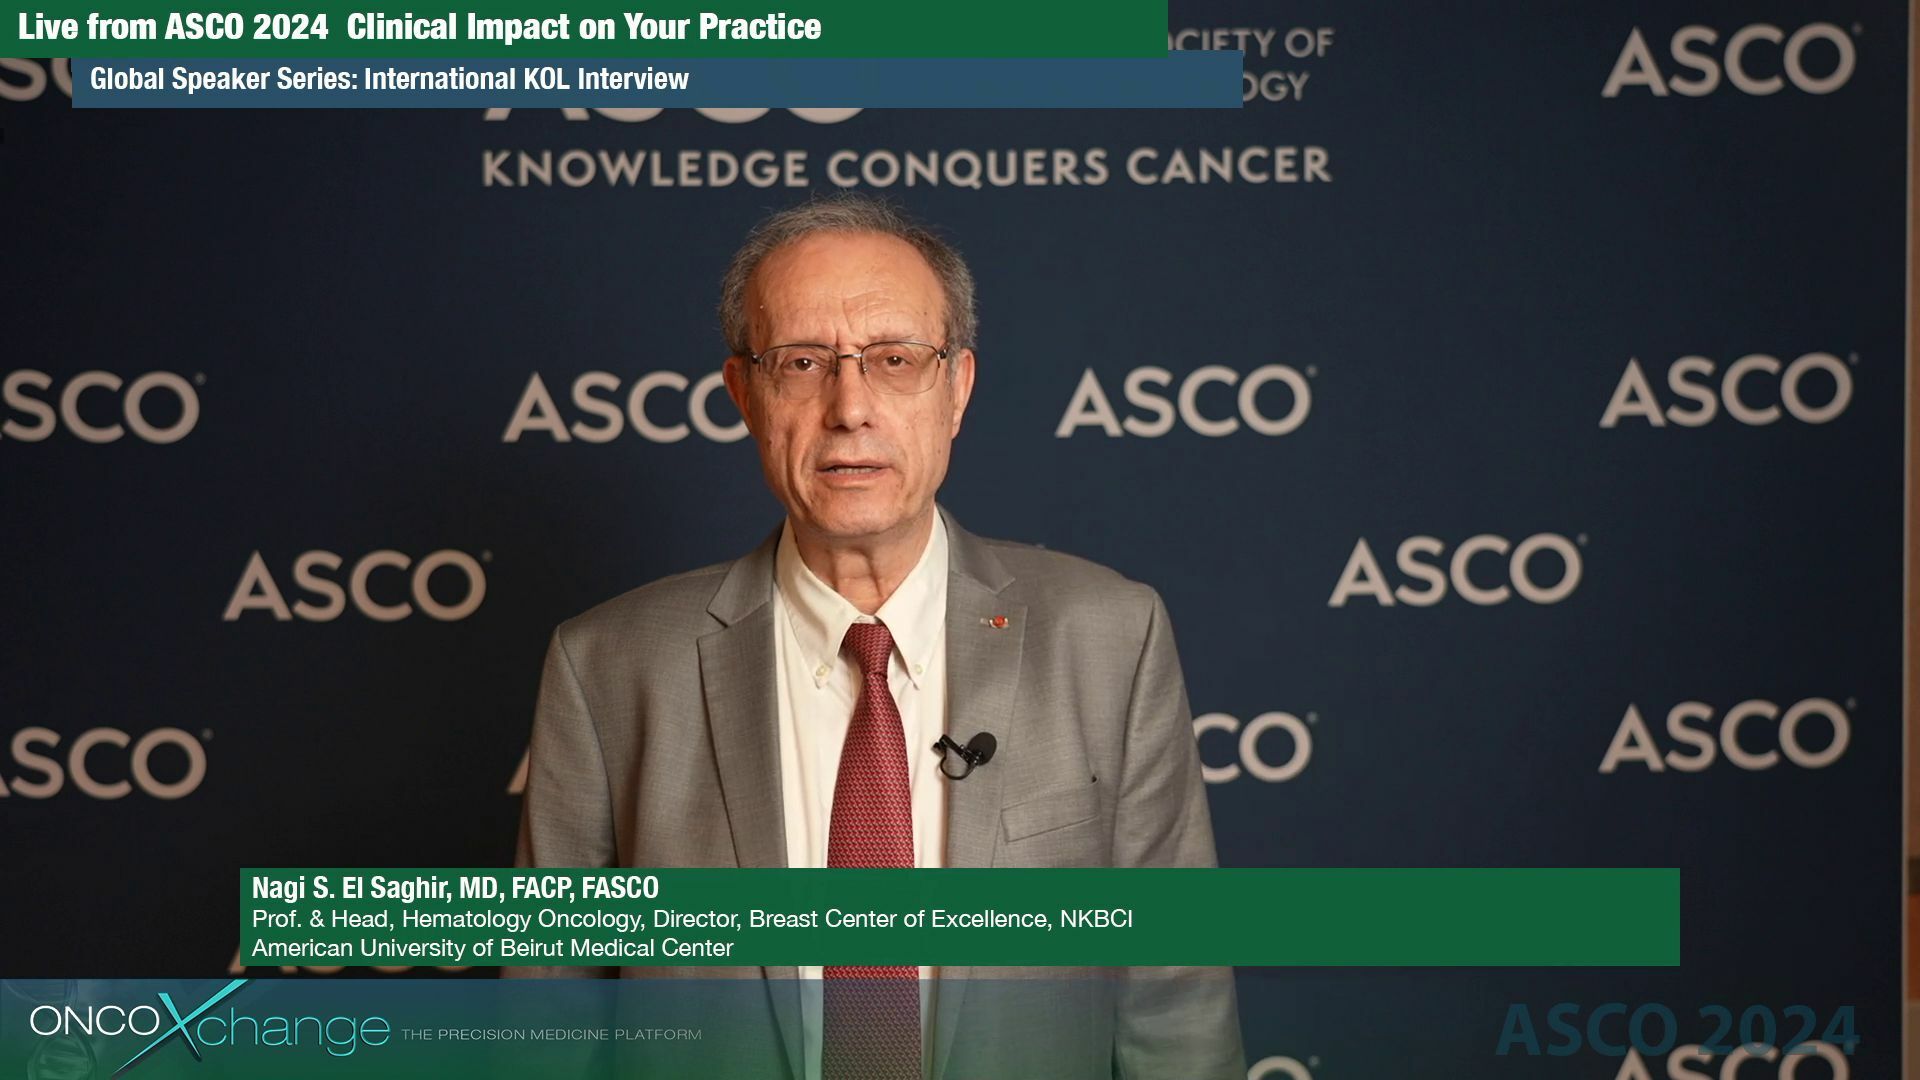 ASCO 2024 -  Dr. Nagi S. El Saghir on New Advances in Sequencing CDK4/6 Inhibitors with Endocrine Therapy in Advanced Breast Cancer